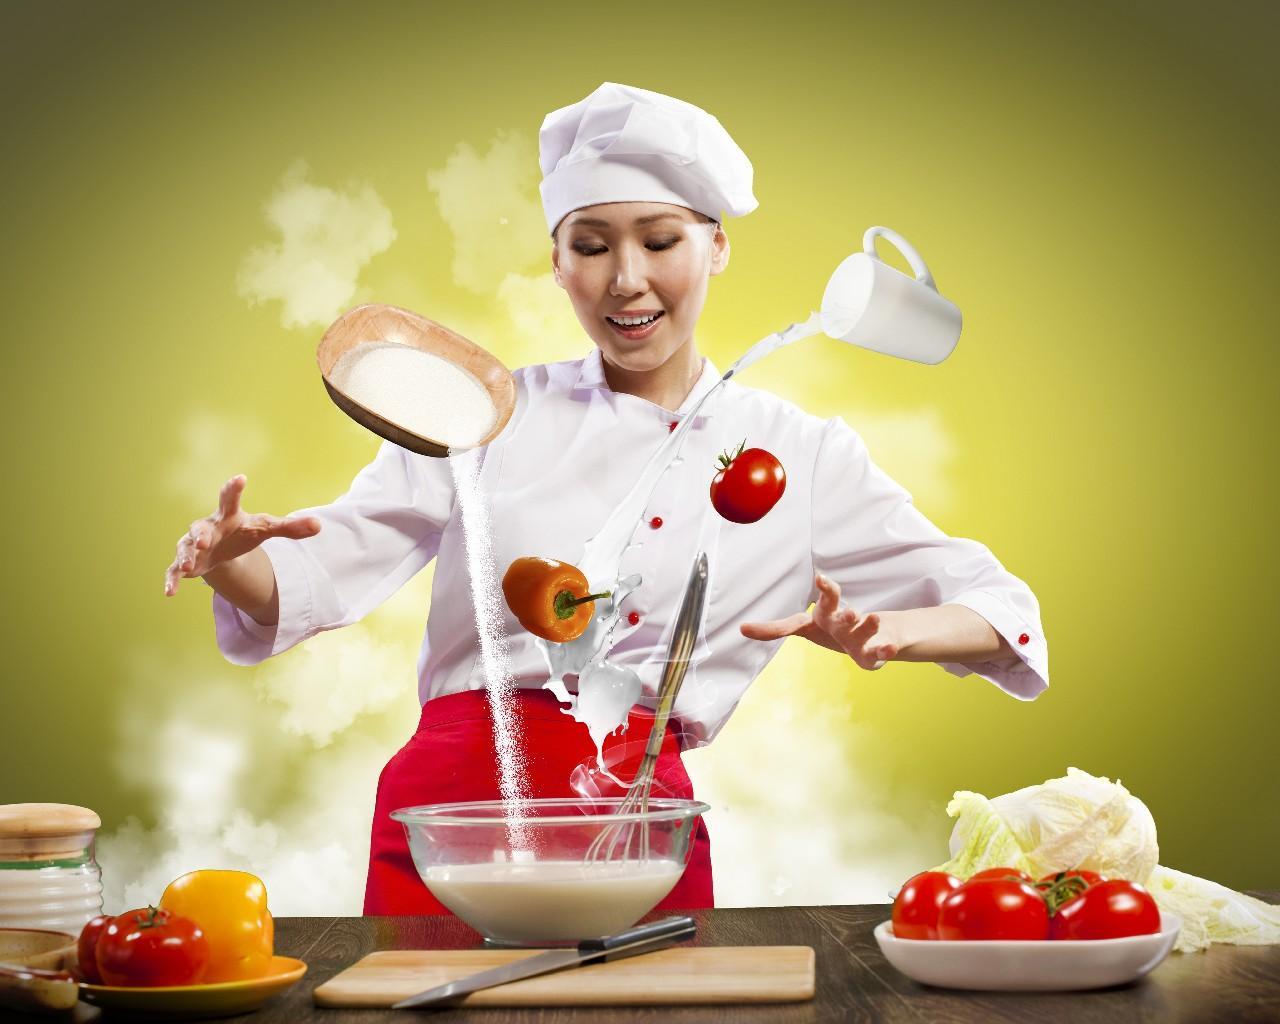 Chef Cooking Wallpaper for Android